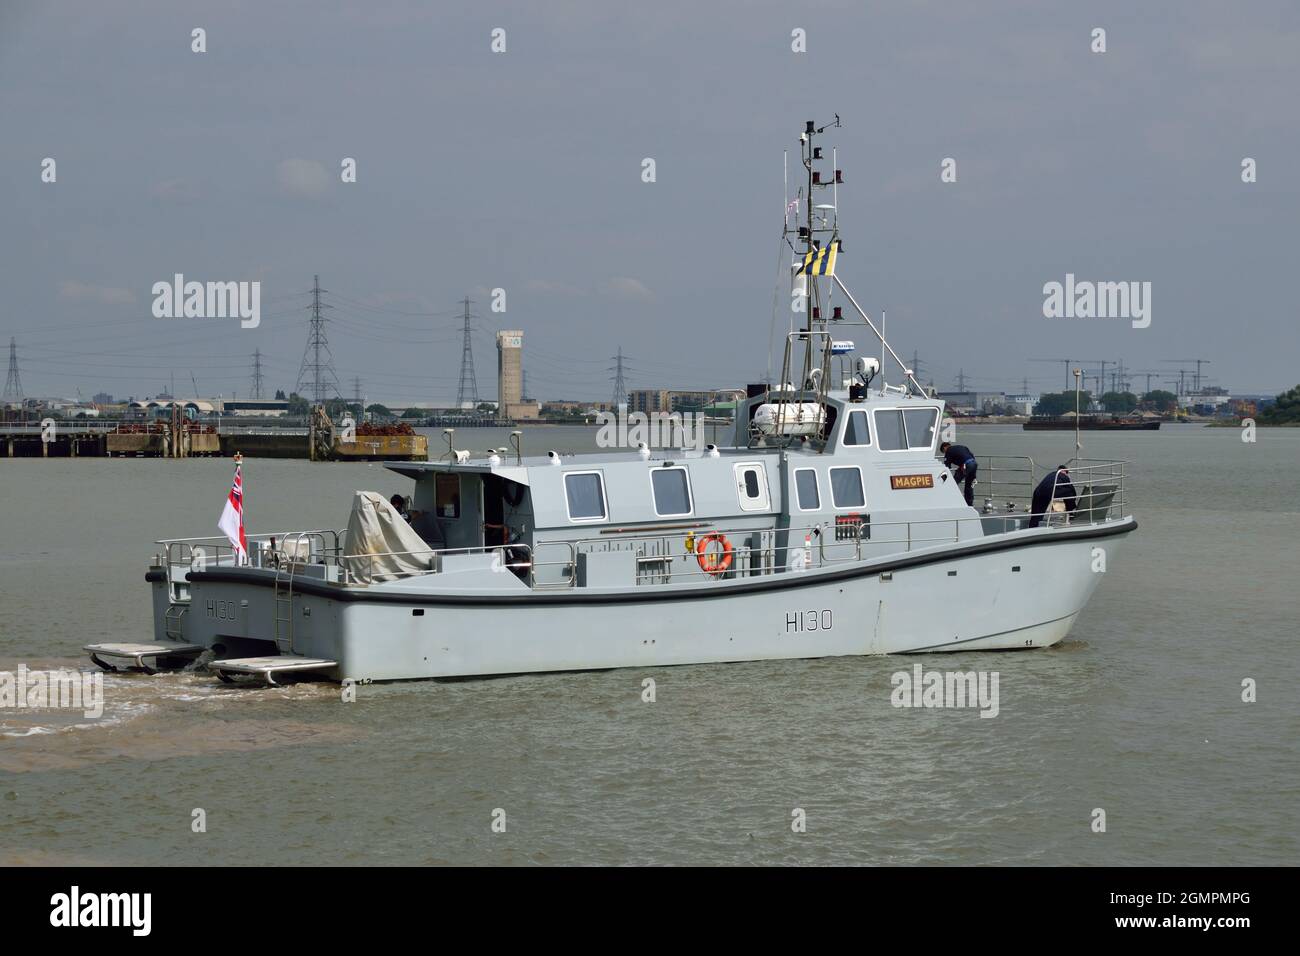 Royal Navy survey vessel HMS MAGPIE leaving London's Royal Docks after taking part in DSEI 2021 event Stock Photo